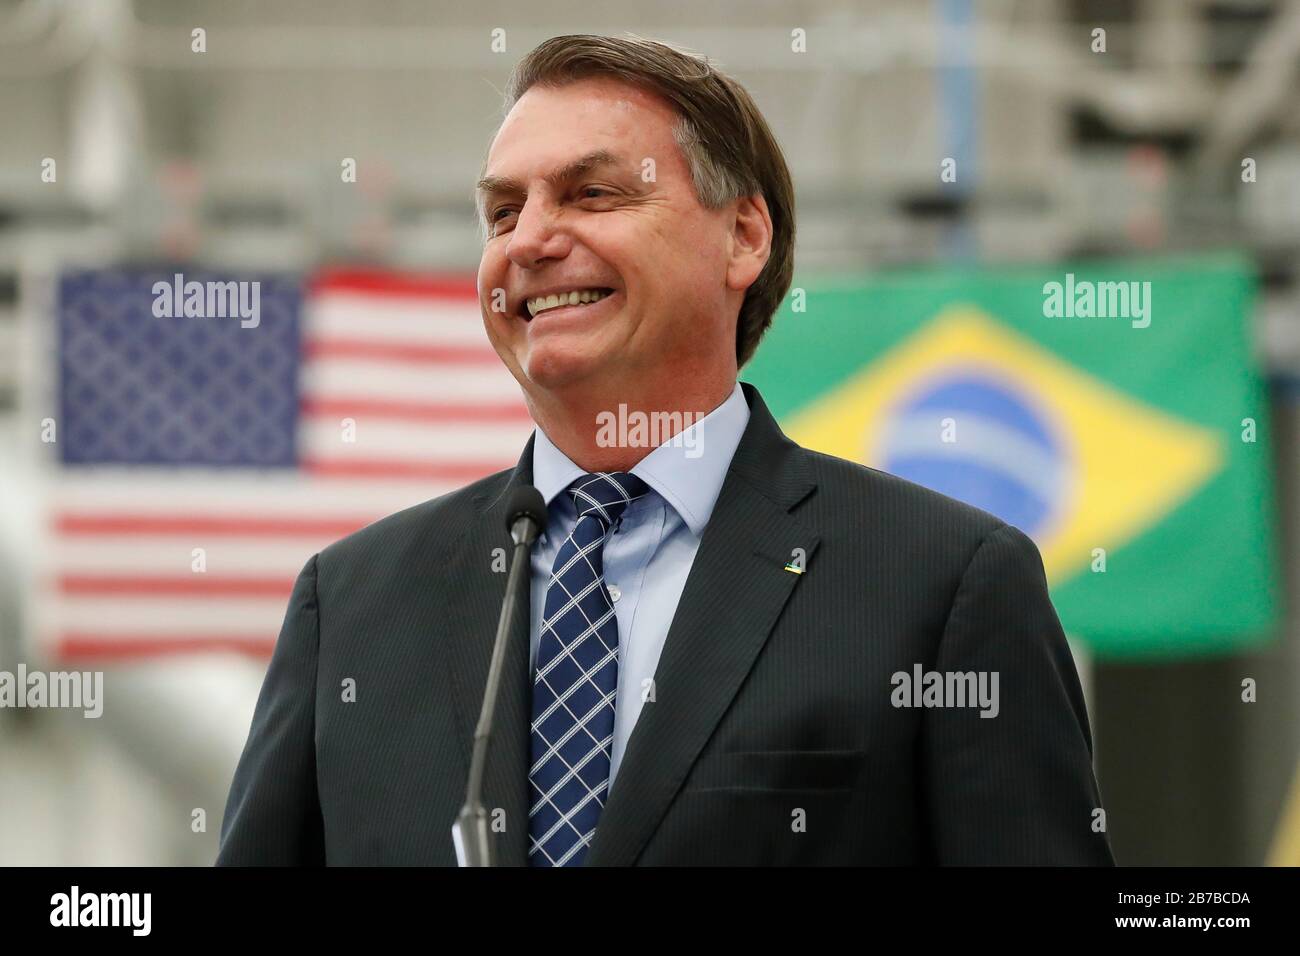 Brazilian President Jair Bolsonaro speaks during a visit to an assembly plant of the  Brazilian plane maker Embraer  March 10, 2020 in Jacksonville, Florida. The factory makes the Embraer EMB 314 Super Tucano turboprop light attack aircraft in a partnership with Sierra Nevada Corporation. Stock Photo